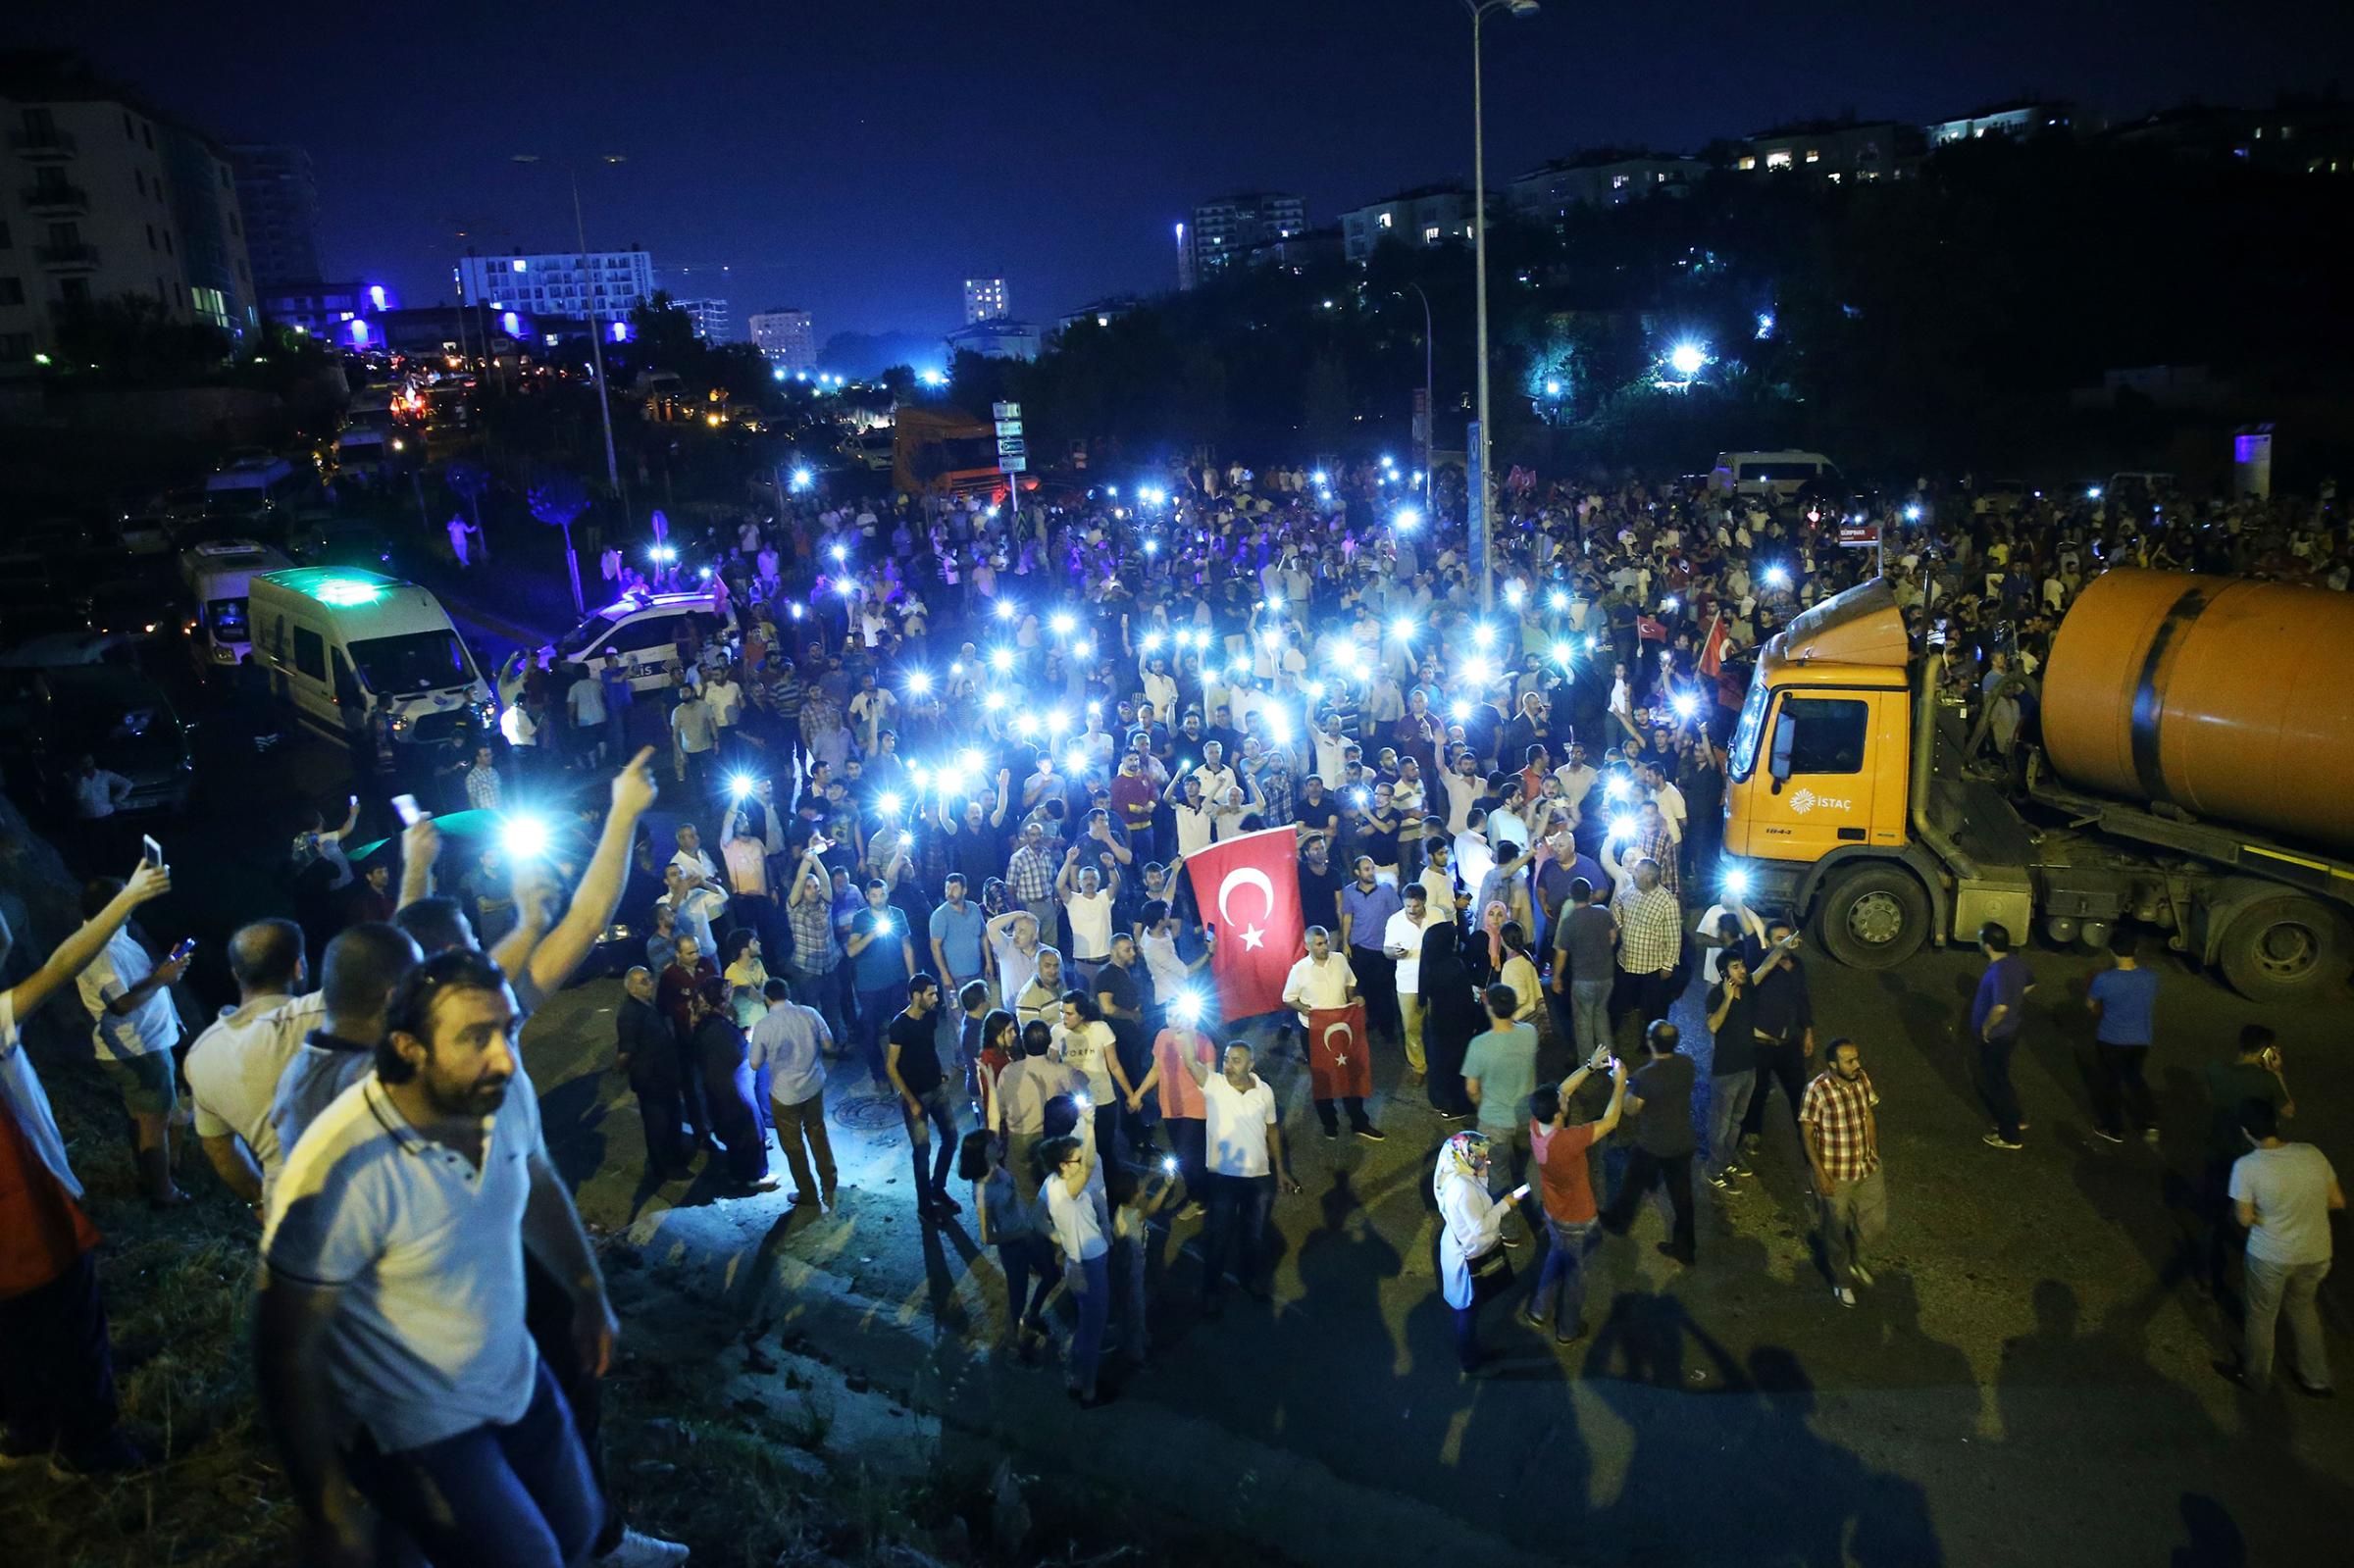 People gather with their mobile phones to react against the military coup attempt in the Tuzla District of Istanbul, Turkey, on July 16, 2016.